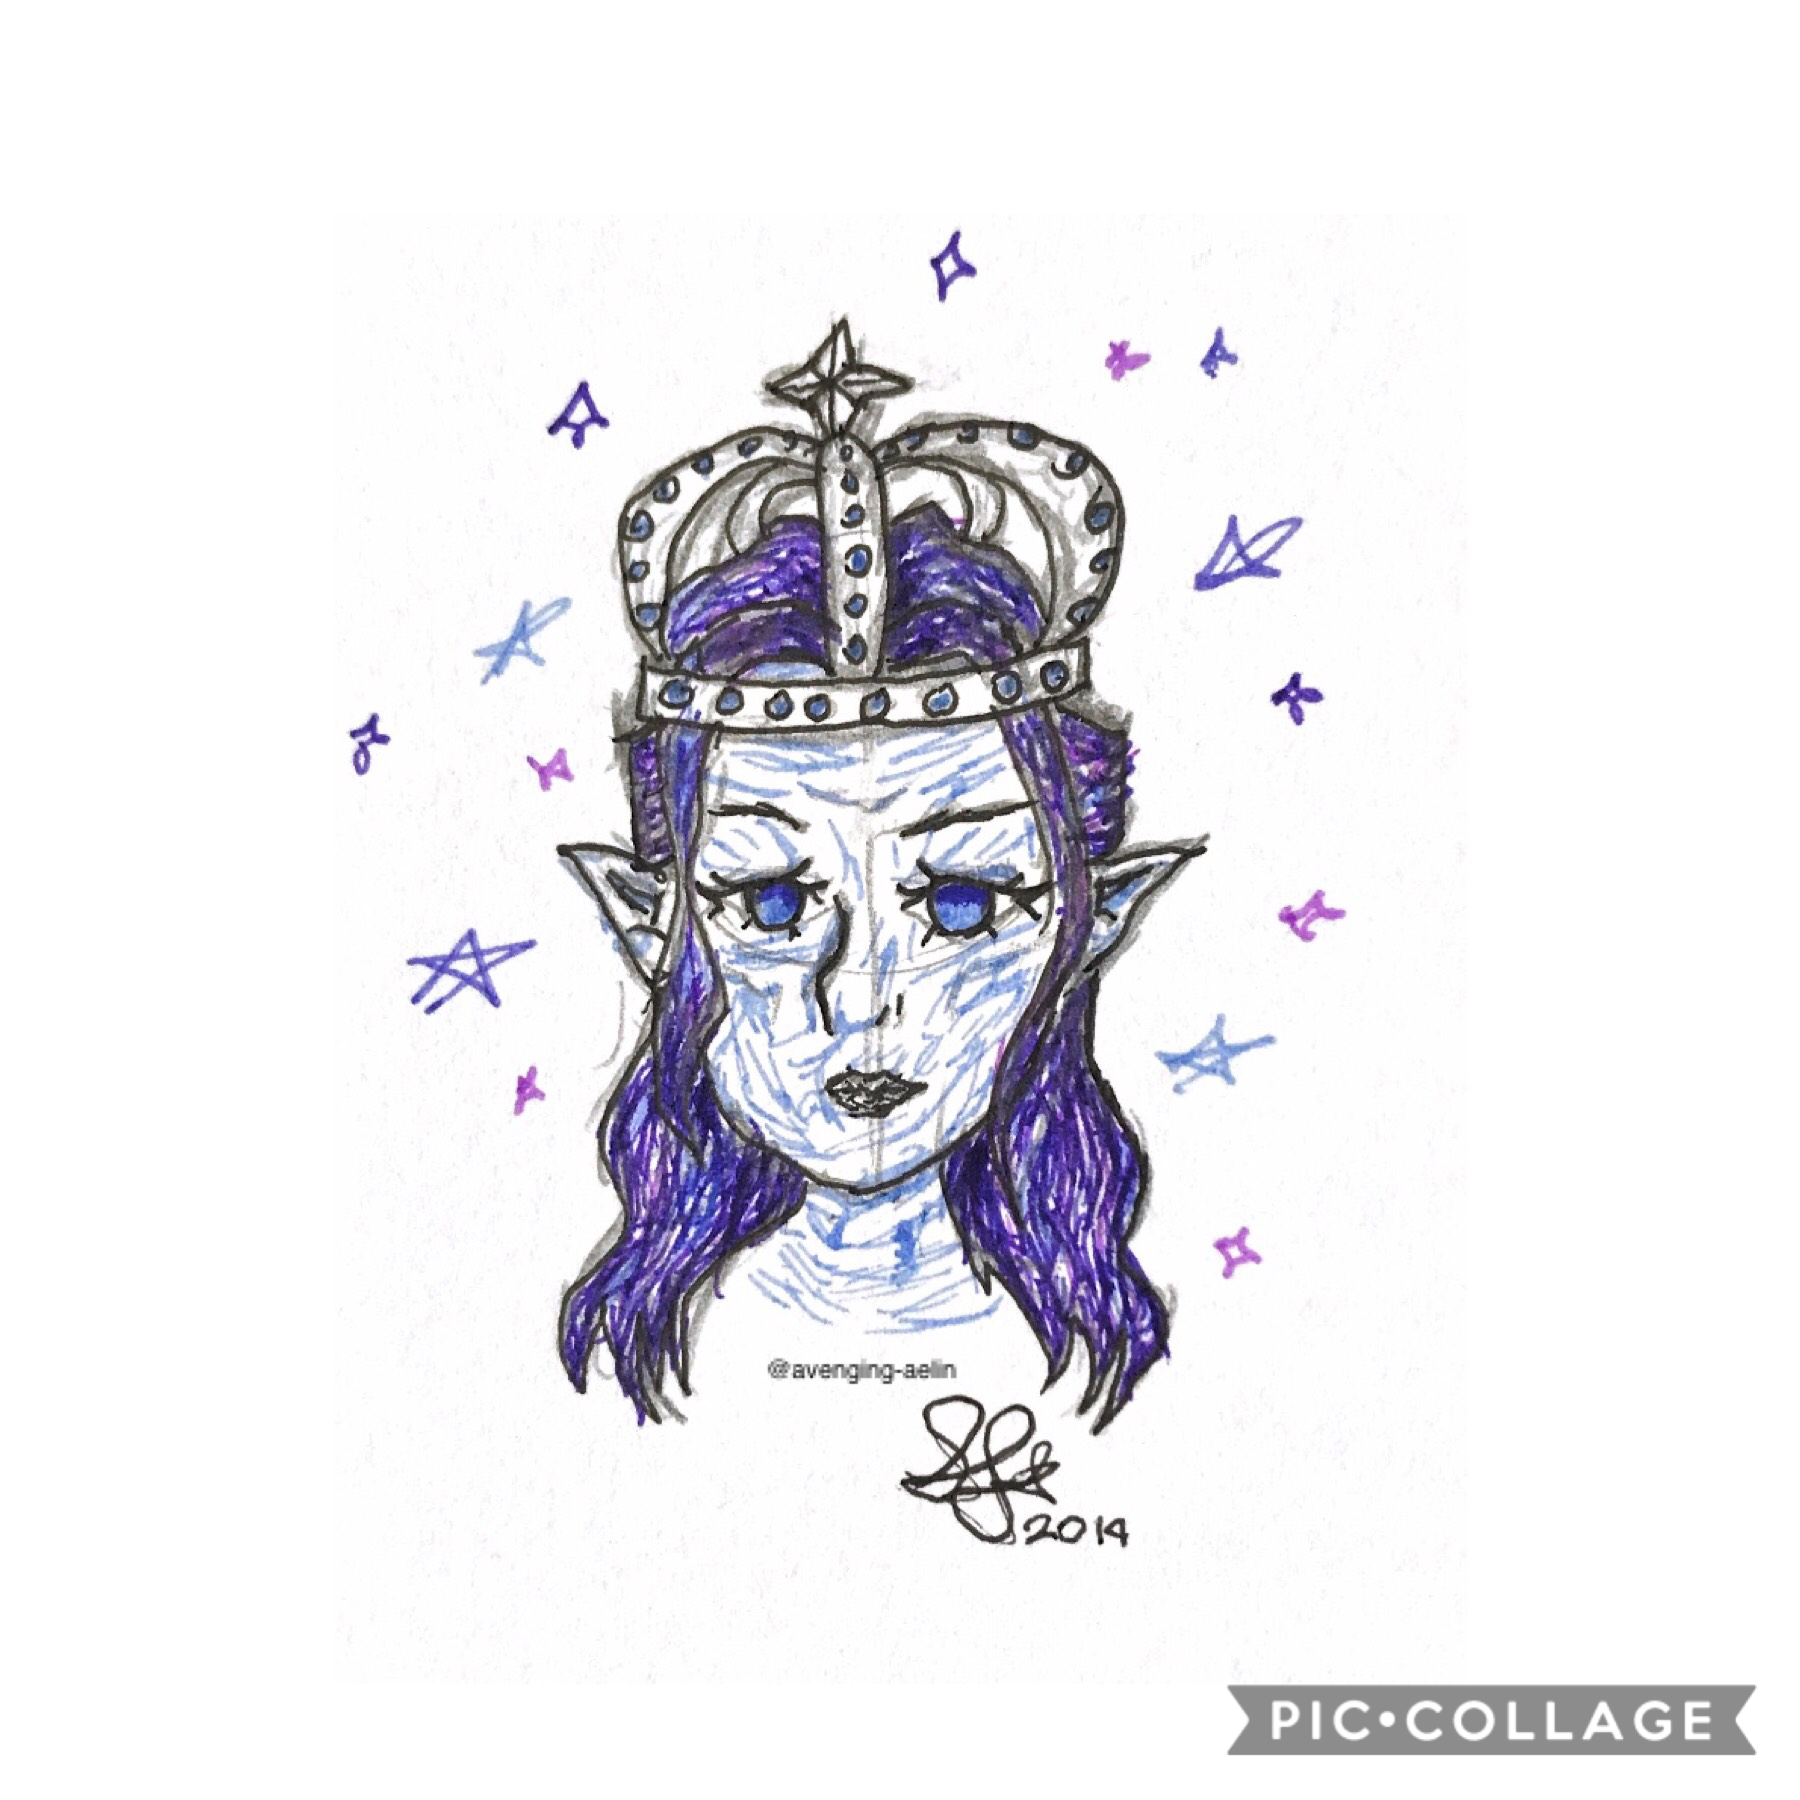 🔮Princess of Stars🔮{tap}

Eyyy, I’m at band camp for the week and I had to bring my tiny travel sketchbook so I can’t finish art trades, but I did get a fancy .2 mm pen for linework along with some other fancy pens.